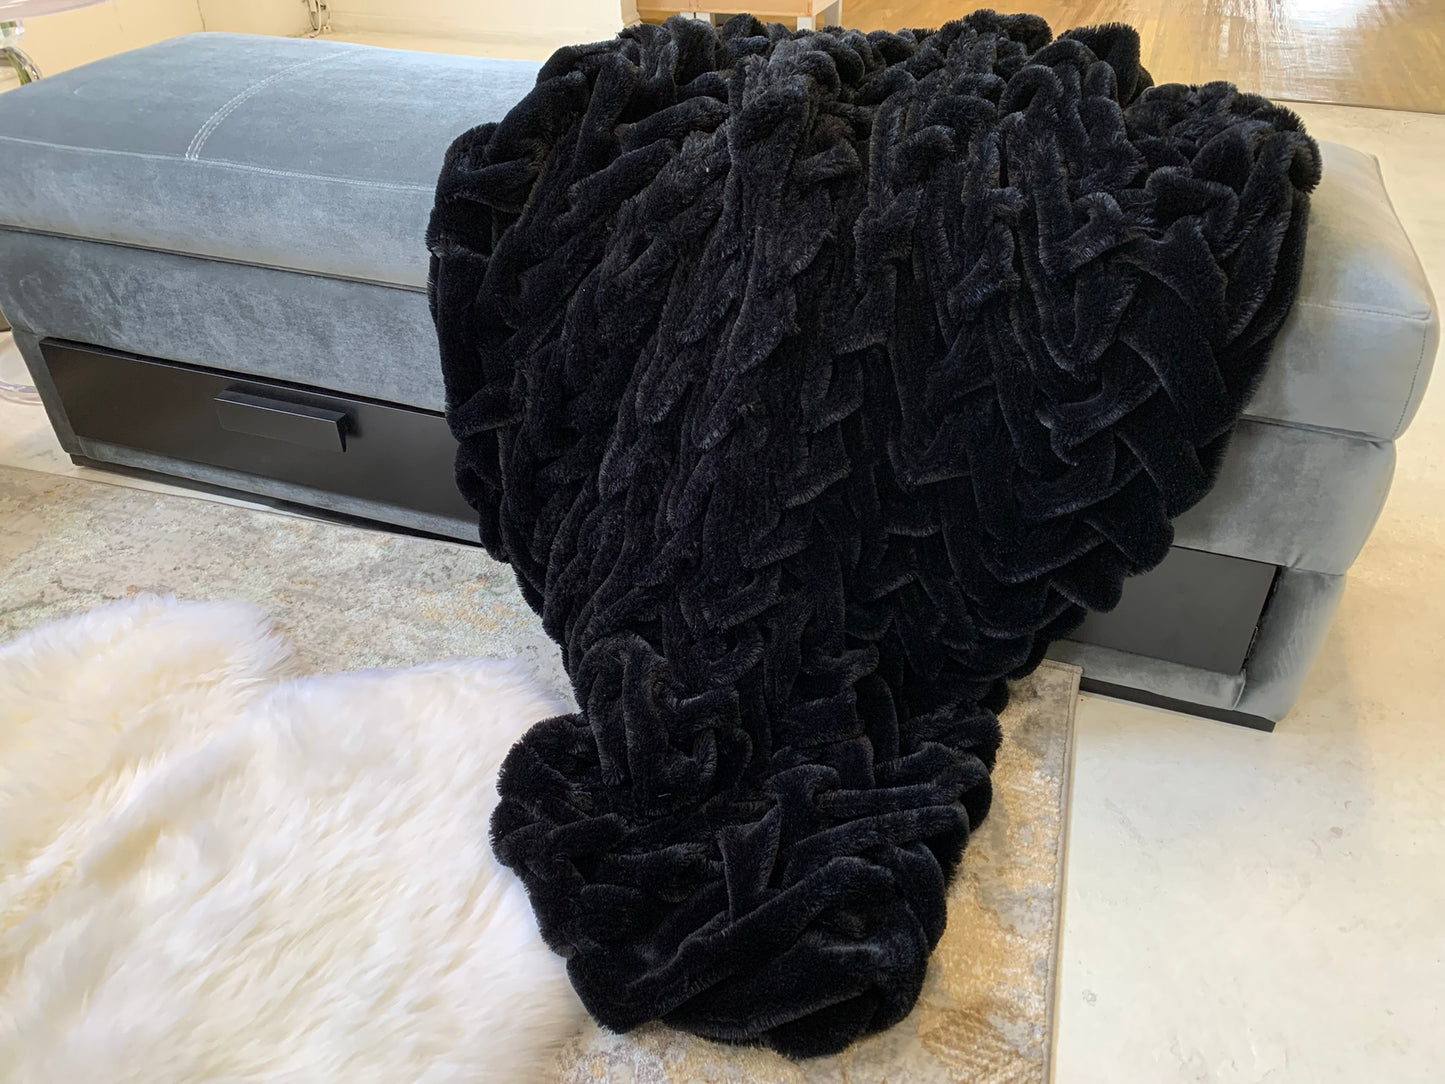 Braided Black and White & Mocha Soft Cozy Faux Fur Blanket/ Quilt/ Throw/ Bedcover/ Coverlet 50 X 60